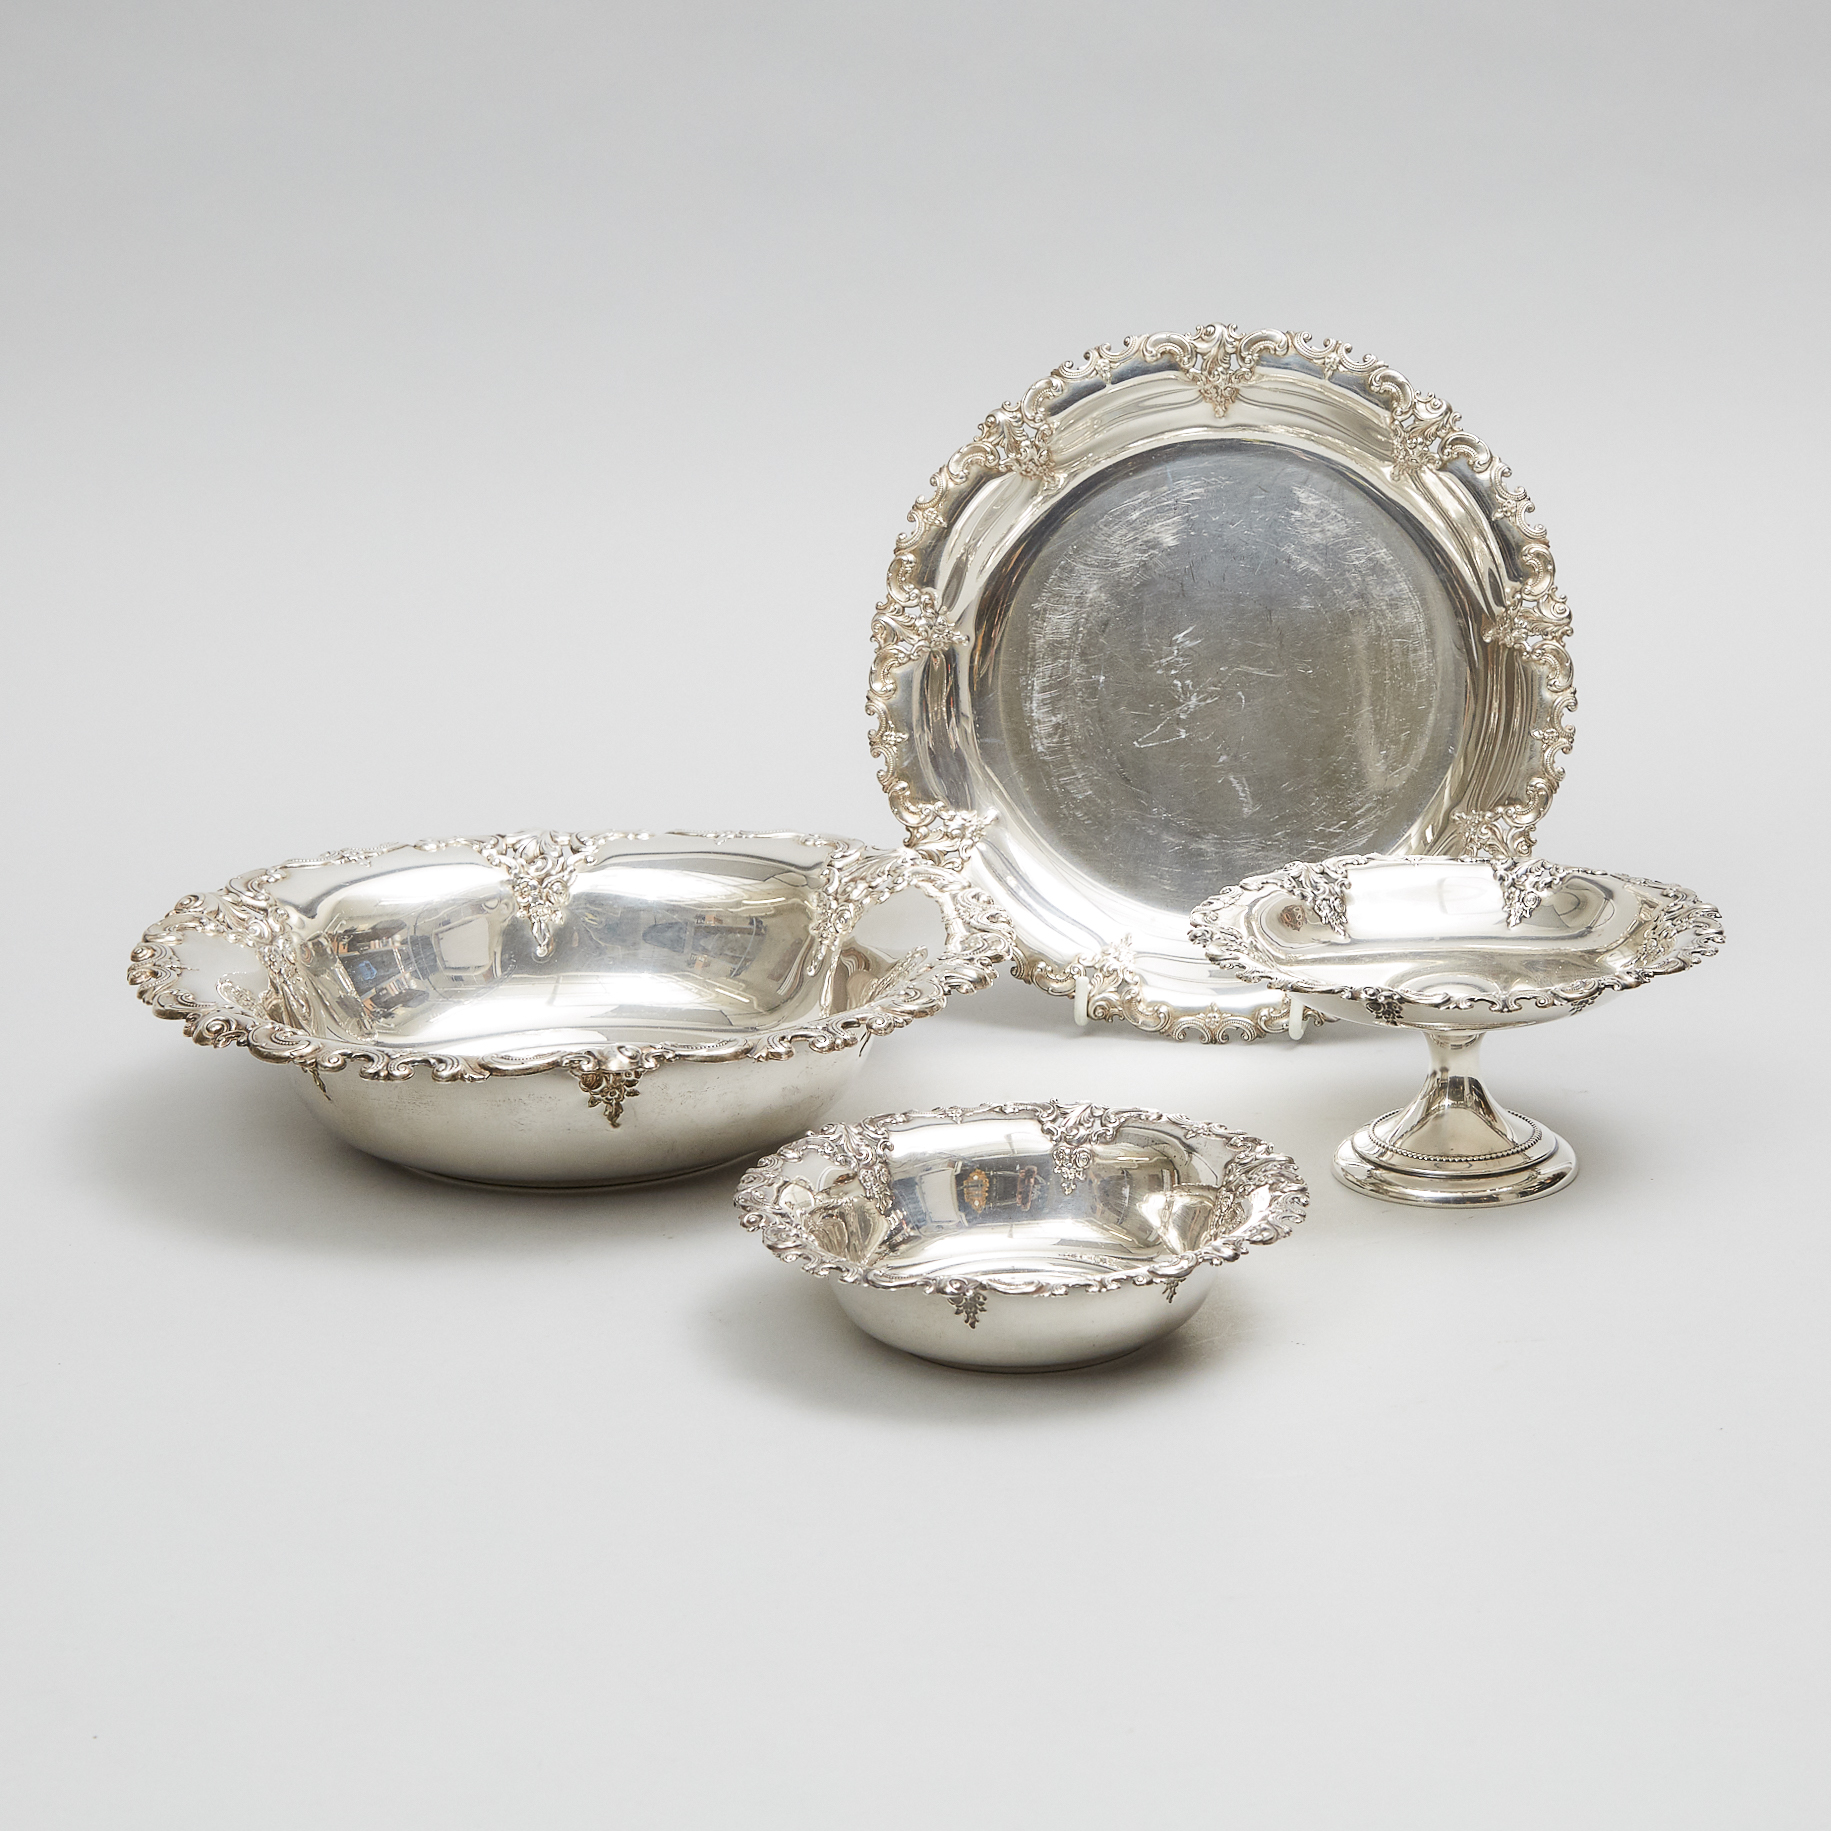 Group of Four American Silver 'Grande Baroque' Pattern Dishes, Wallace Silversmiths, Wallingford, 20th century